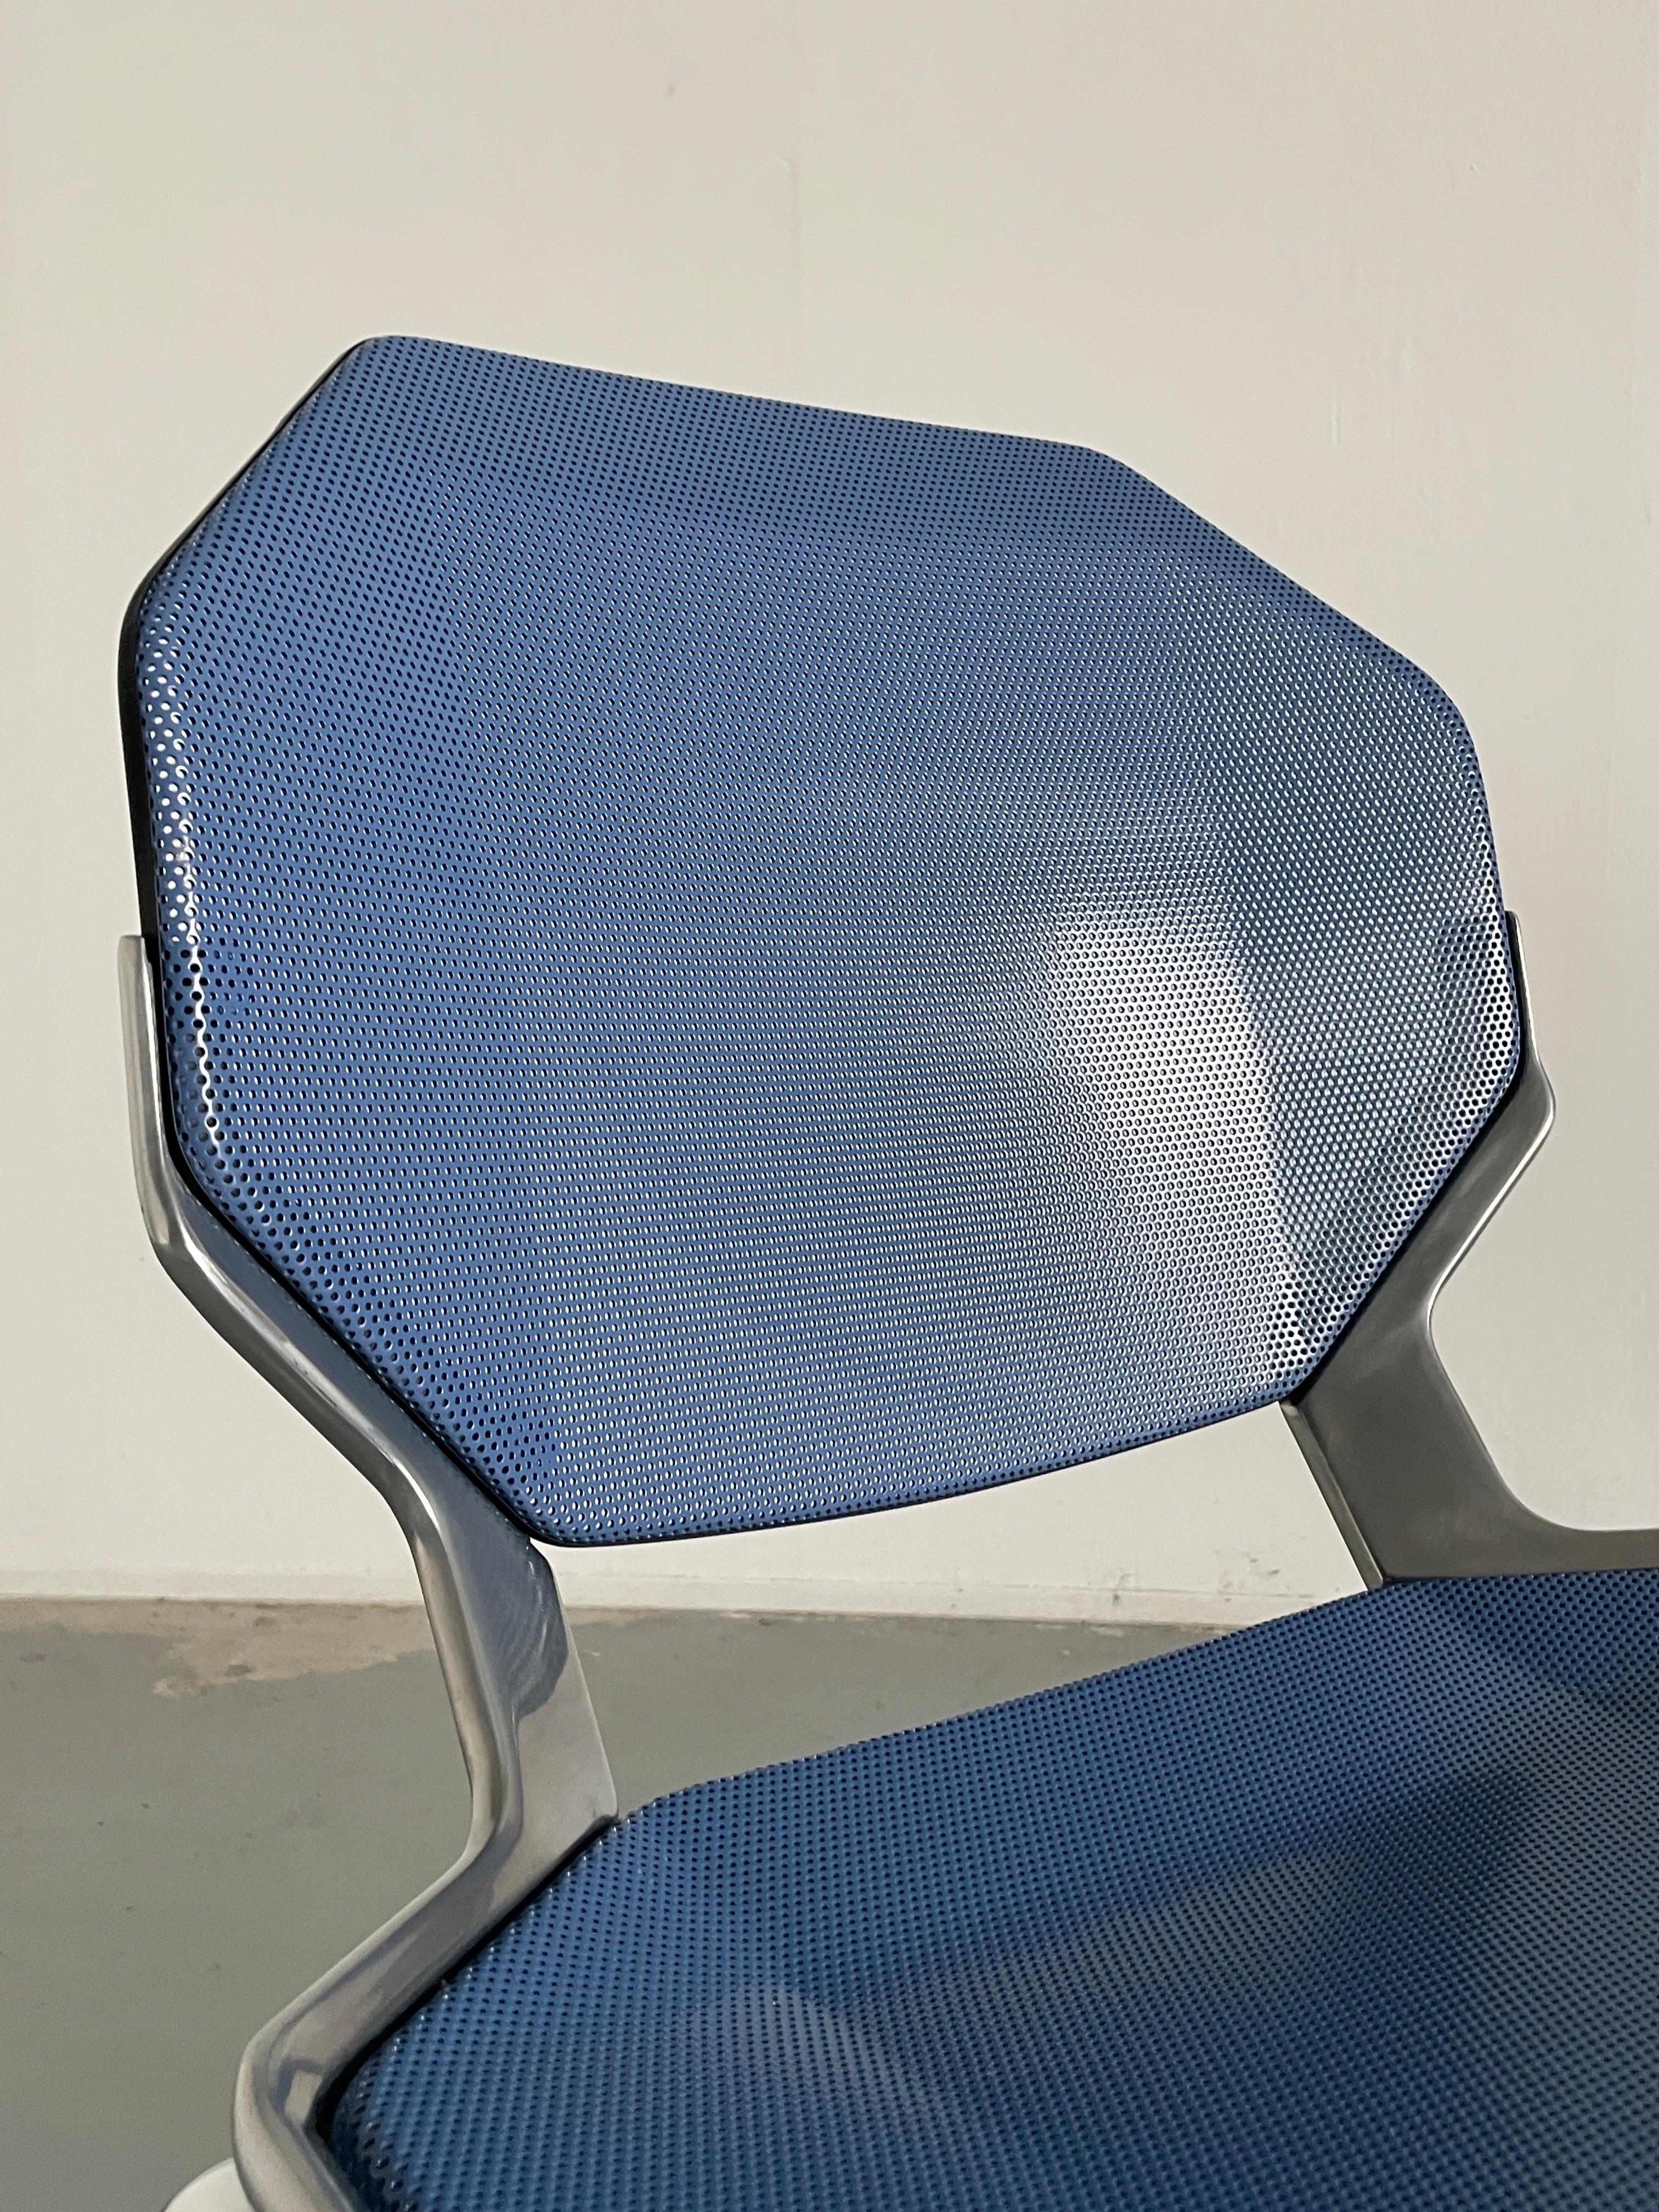 Metal Space Age Futuristic Octagonal Stackable Dining Chairs by Fröscher Sitform, 90s For Sale